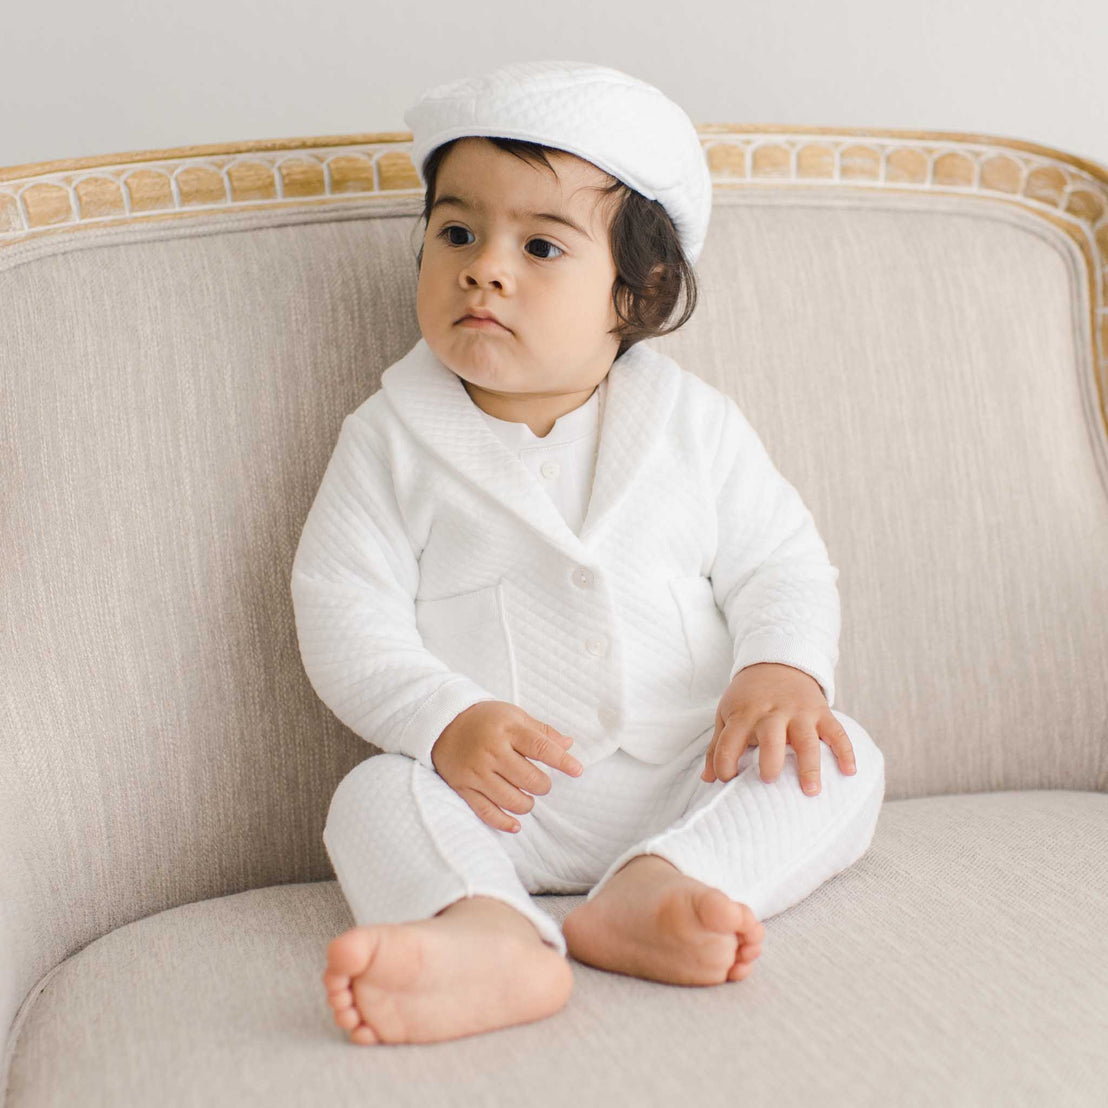 Baby boy sitting on a chair wearing the Elijah 3-Piece Suit made from 100% white textured cotton jacket and pants, and a white cotton / rayon blend shirt